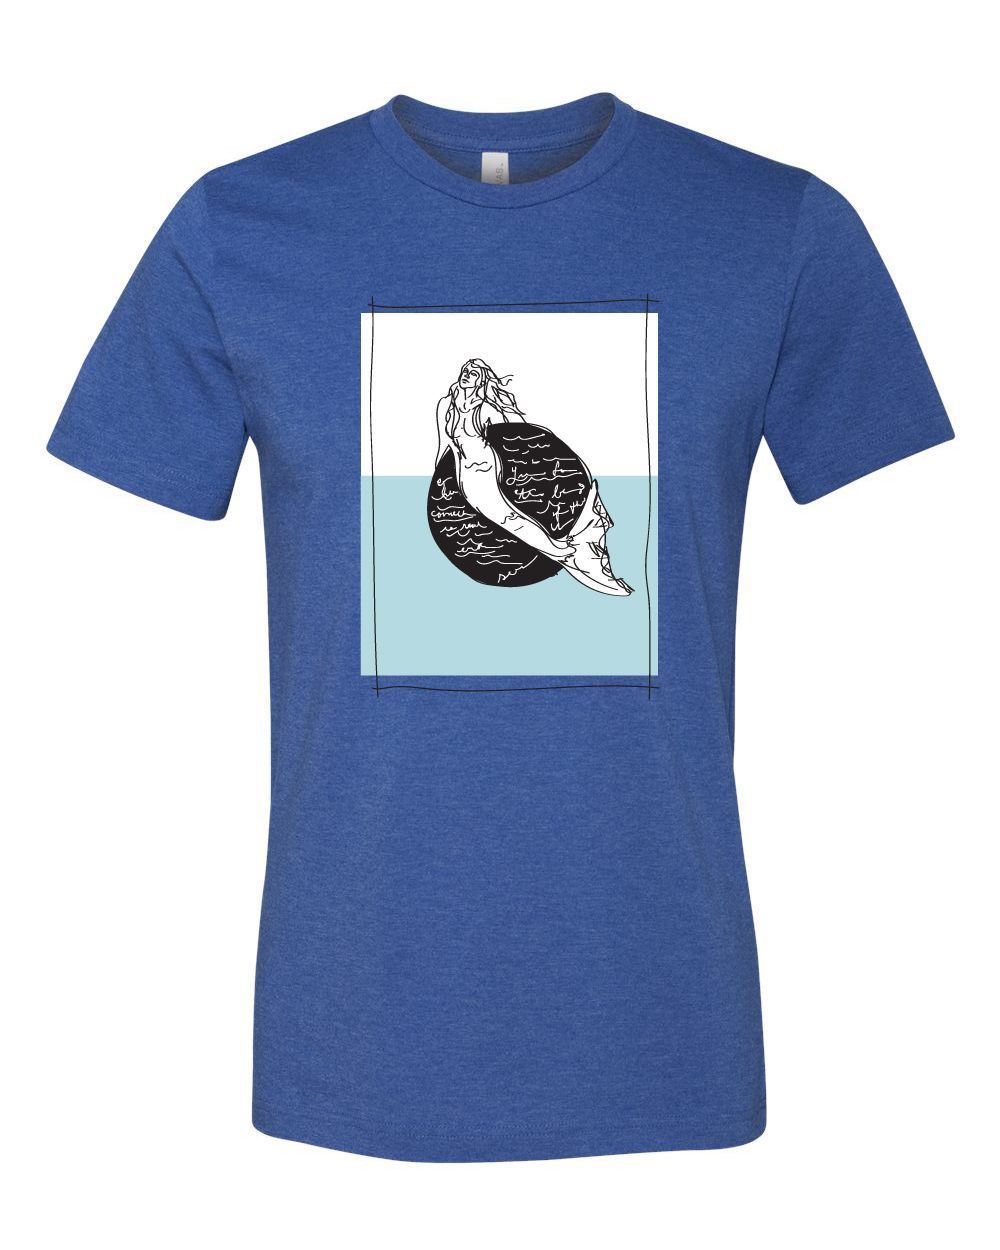 MERMAID WHITE PATCH OCEAN CONSERVATION Jersey T Shirt